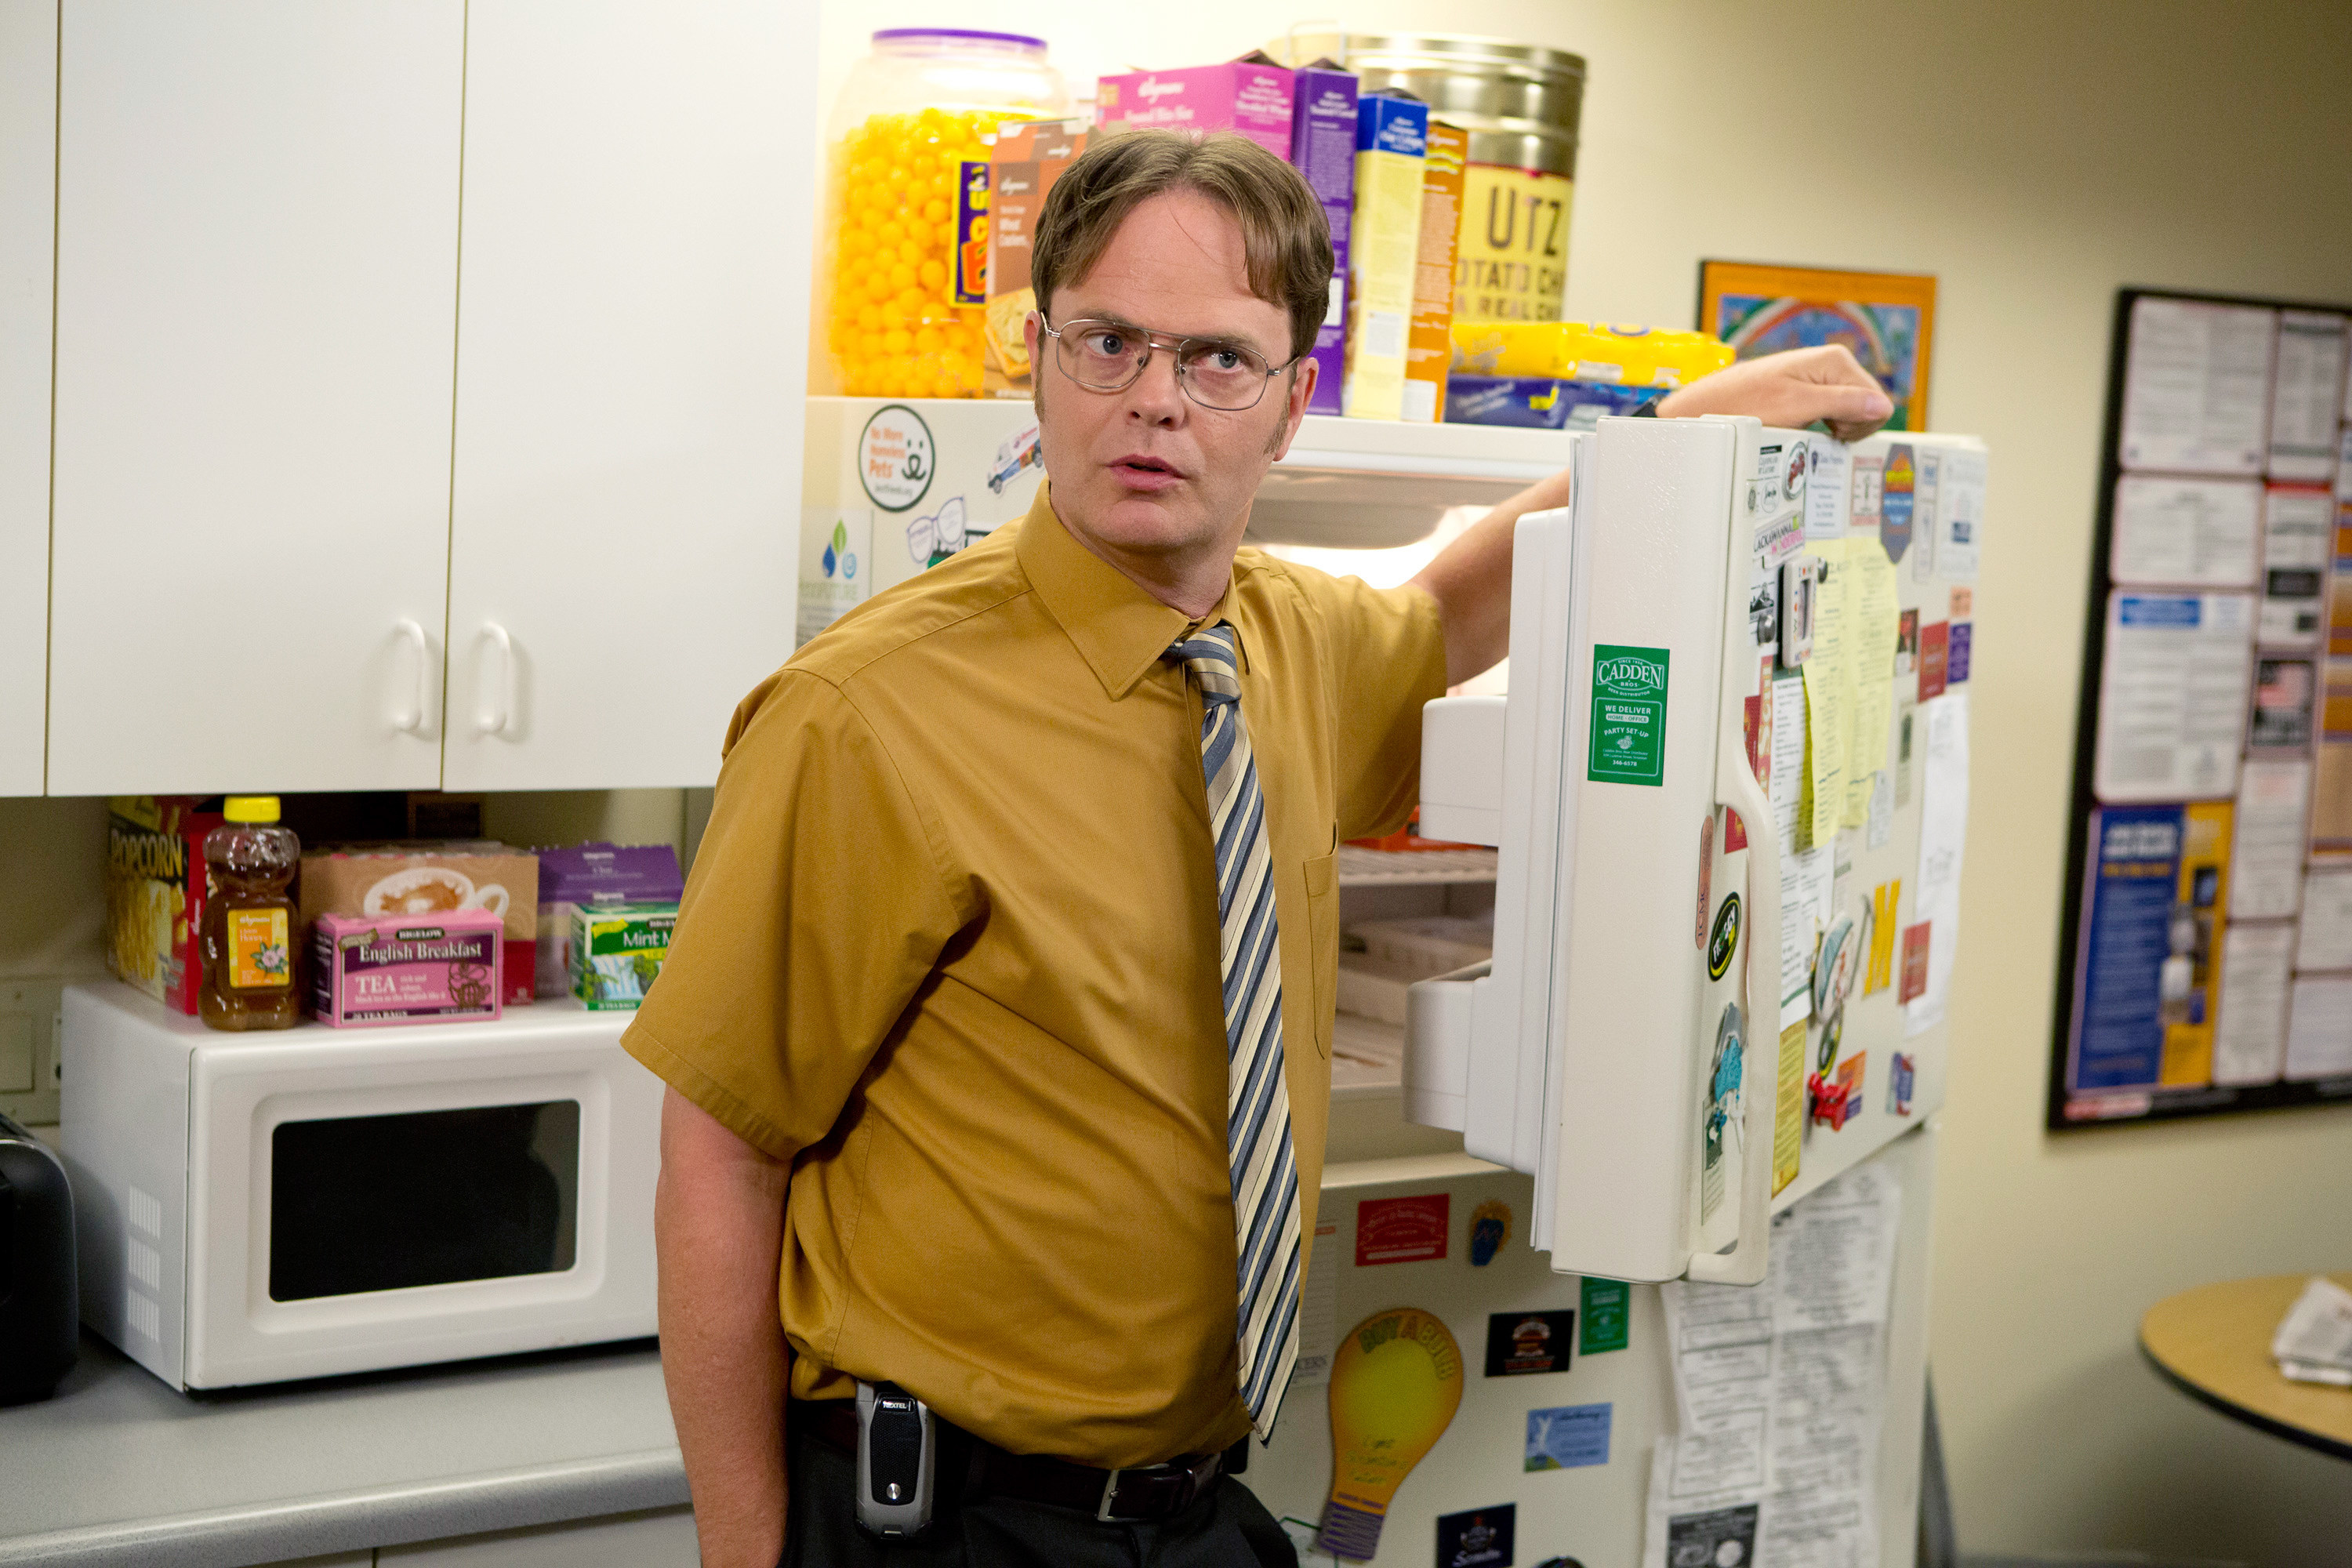 Dwight wears the cat pee–colored, dingy collared shirt